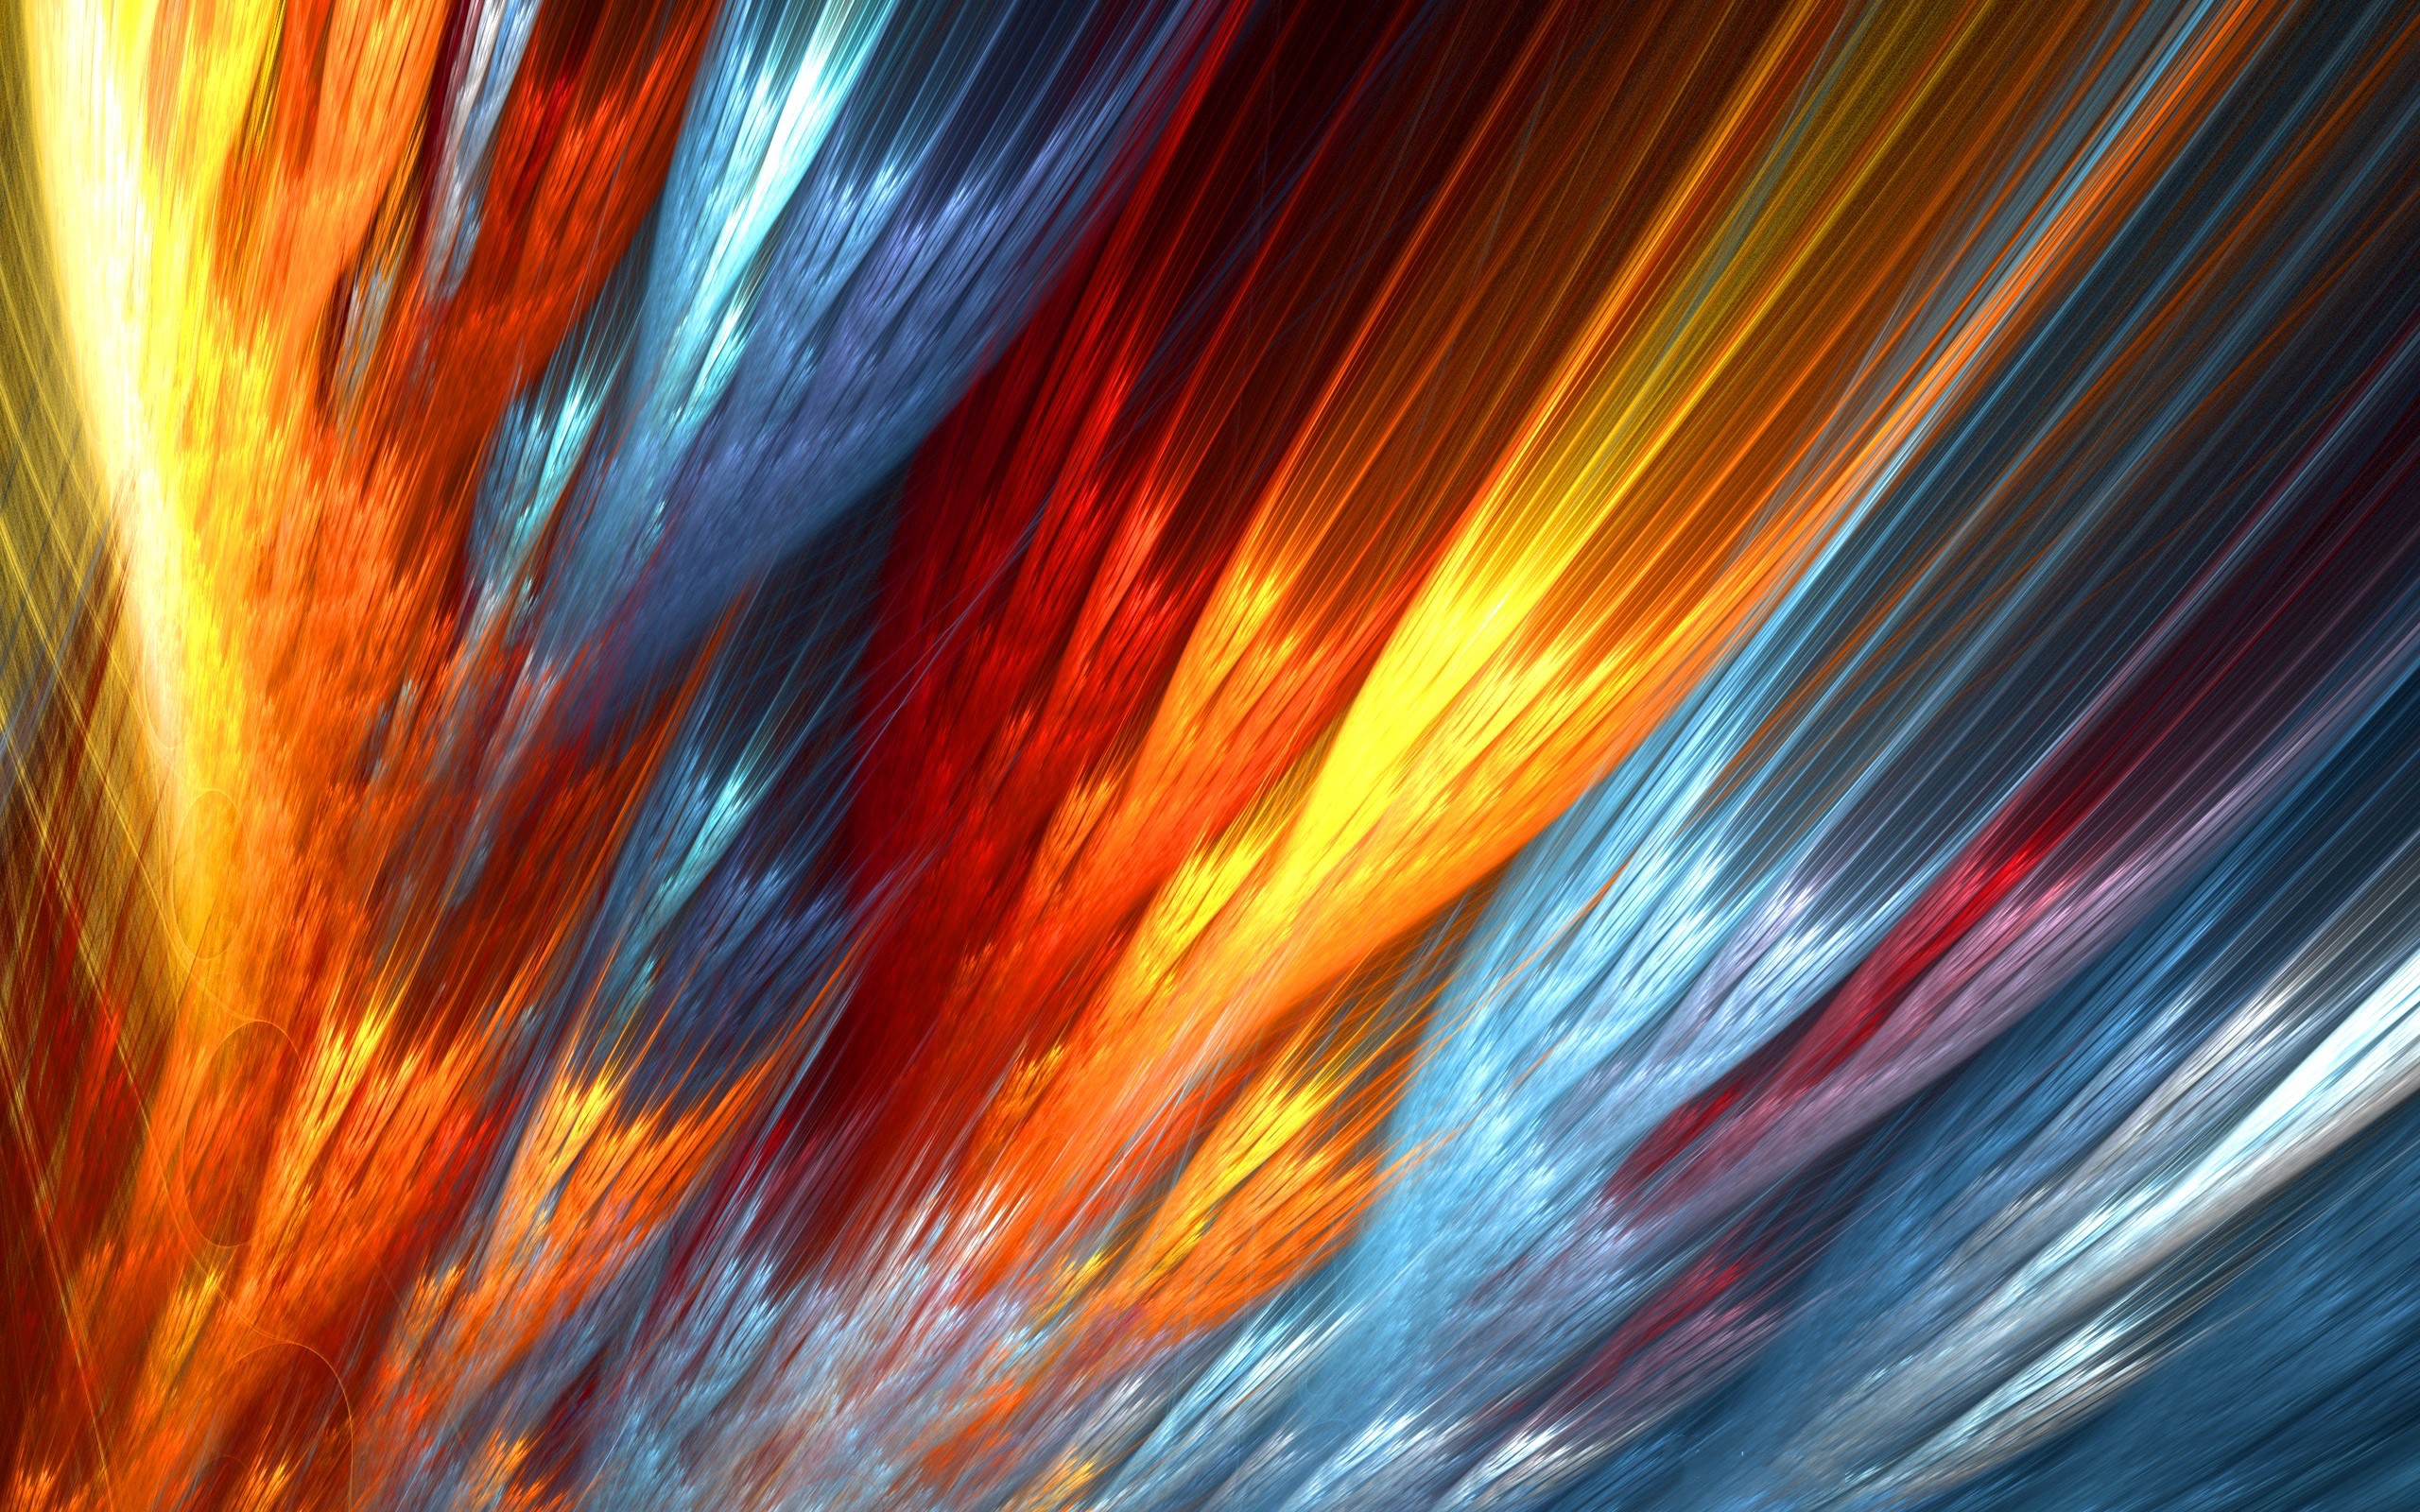 Abstract Colorful Fire Wallpaper HD Desktop Cool